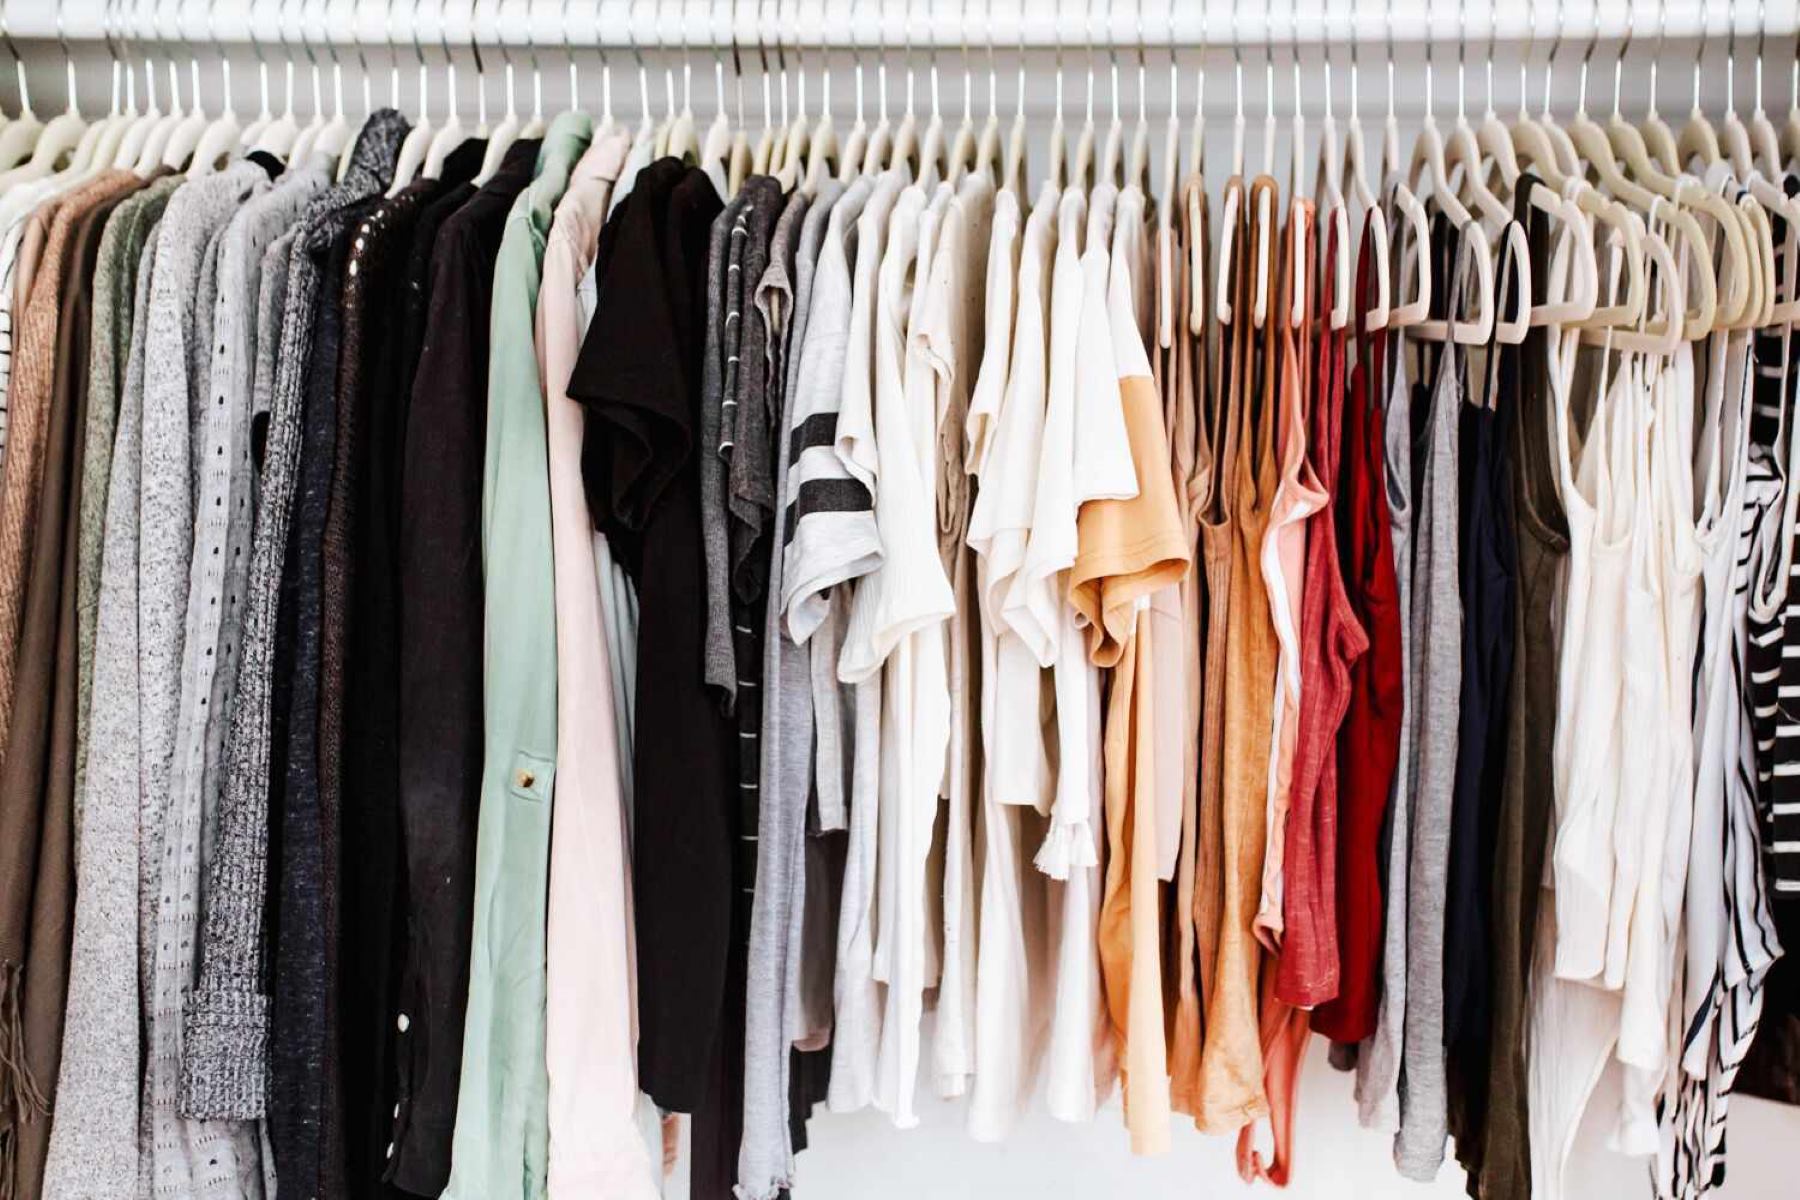 How To Store Shirts In Closet